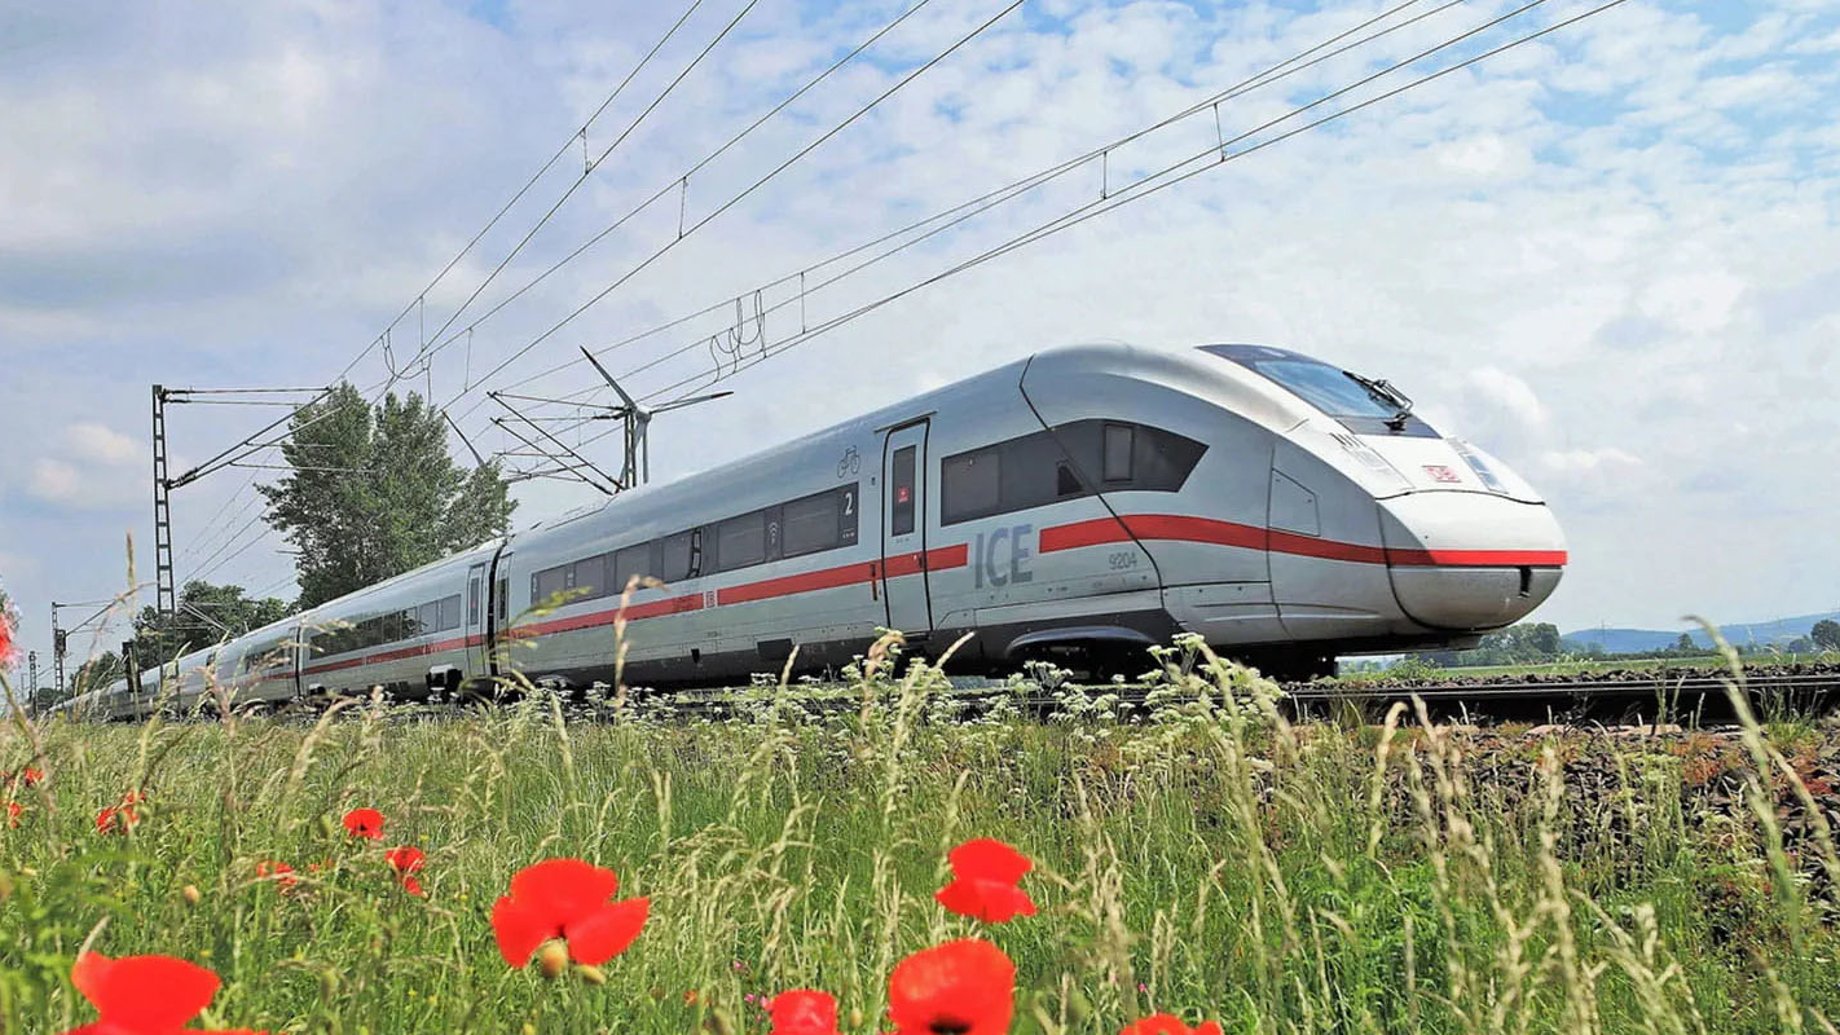 A train in the countryside. Credit: Deutsche Bahn AG / Wolfgang Klee